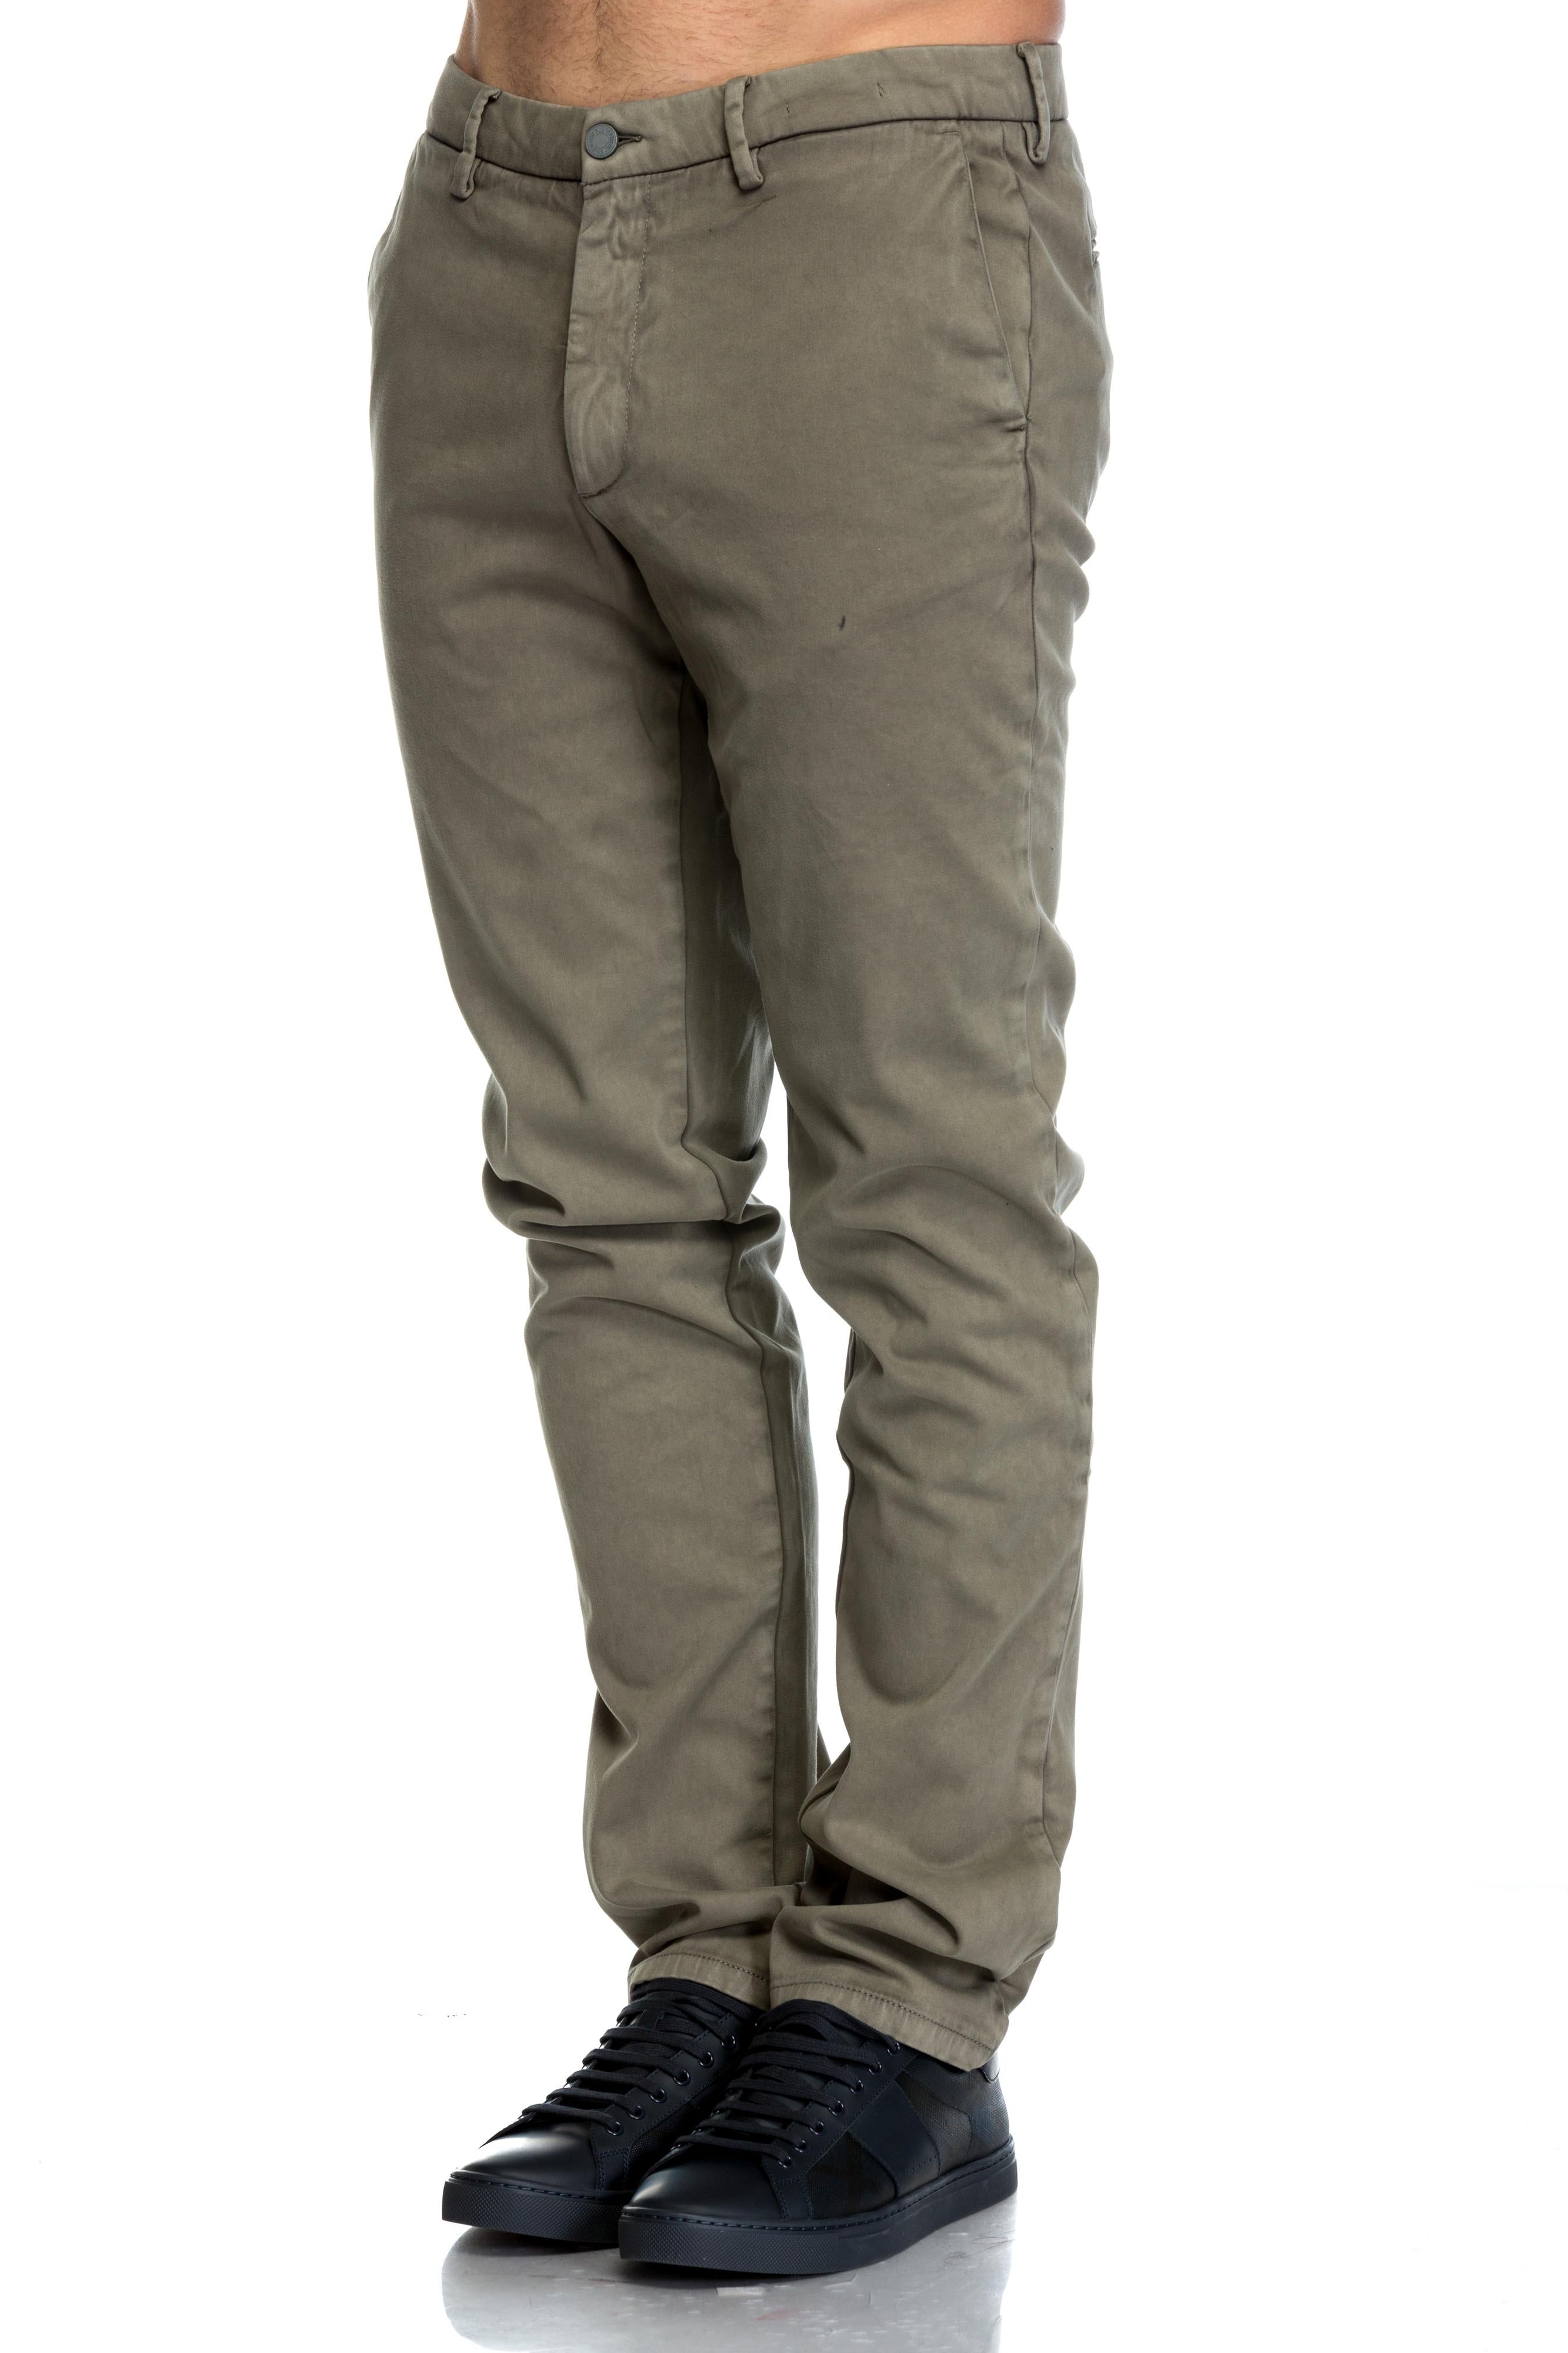 Jeansi Tailored Chino Light Sage Luxe Performance 7 For All Mankind